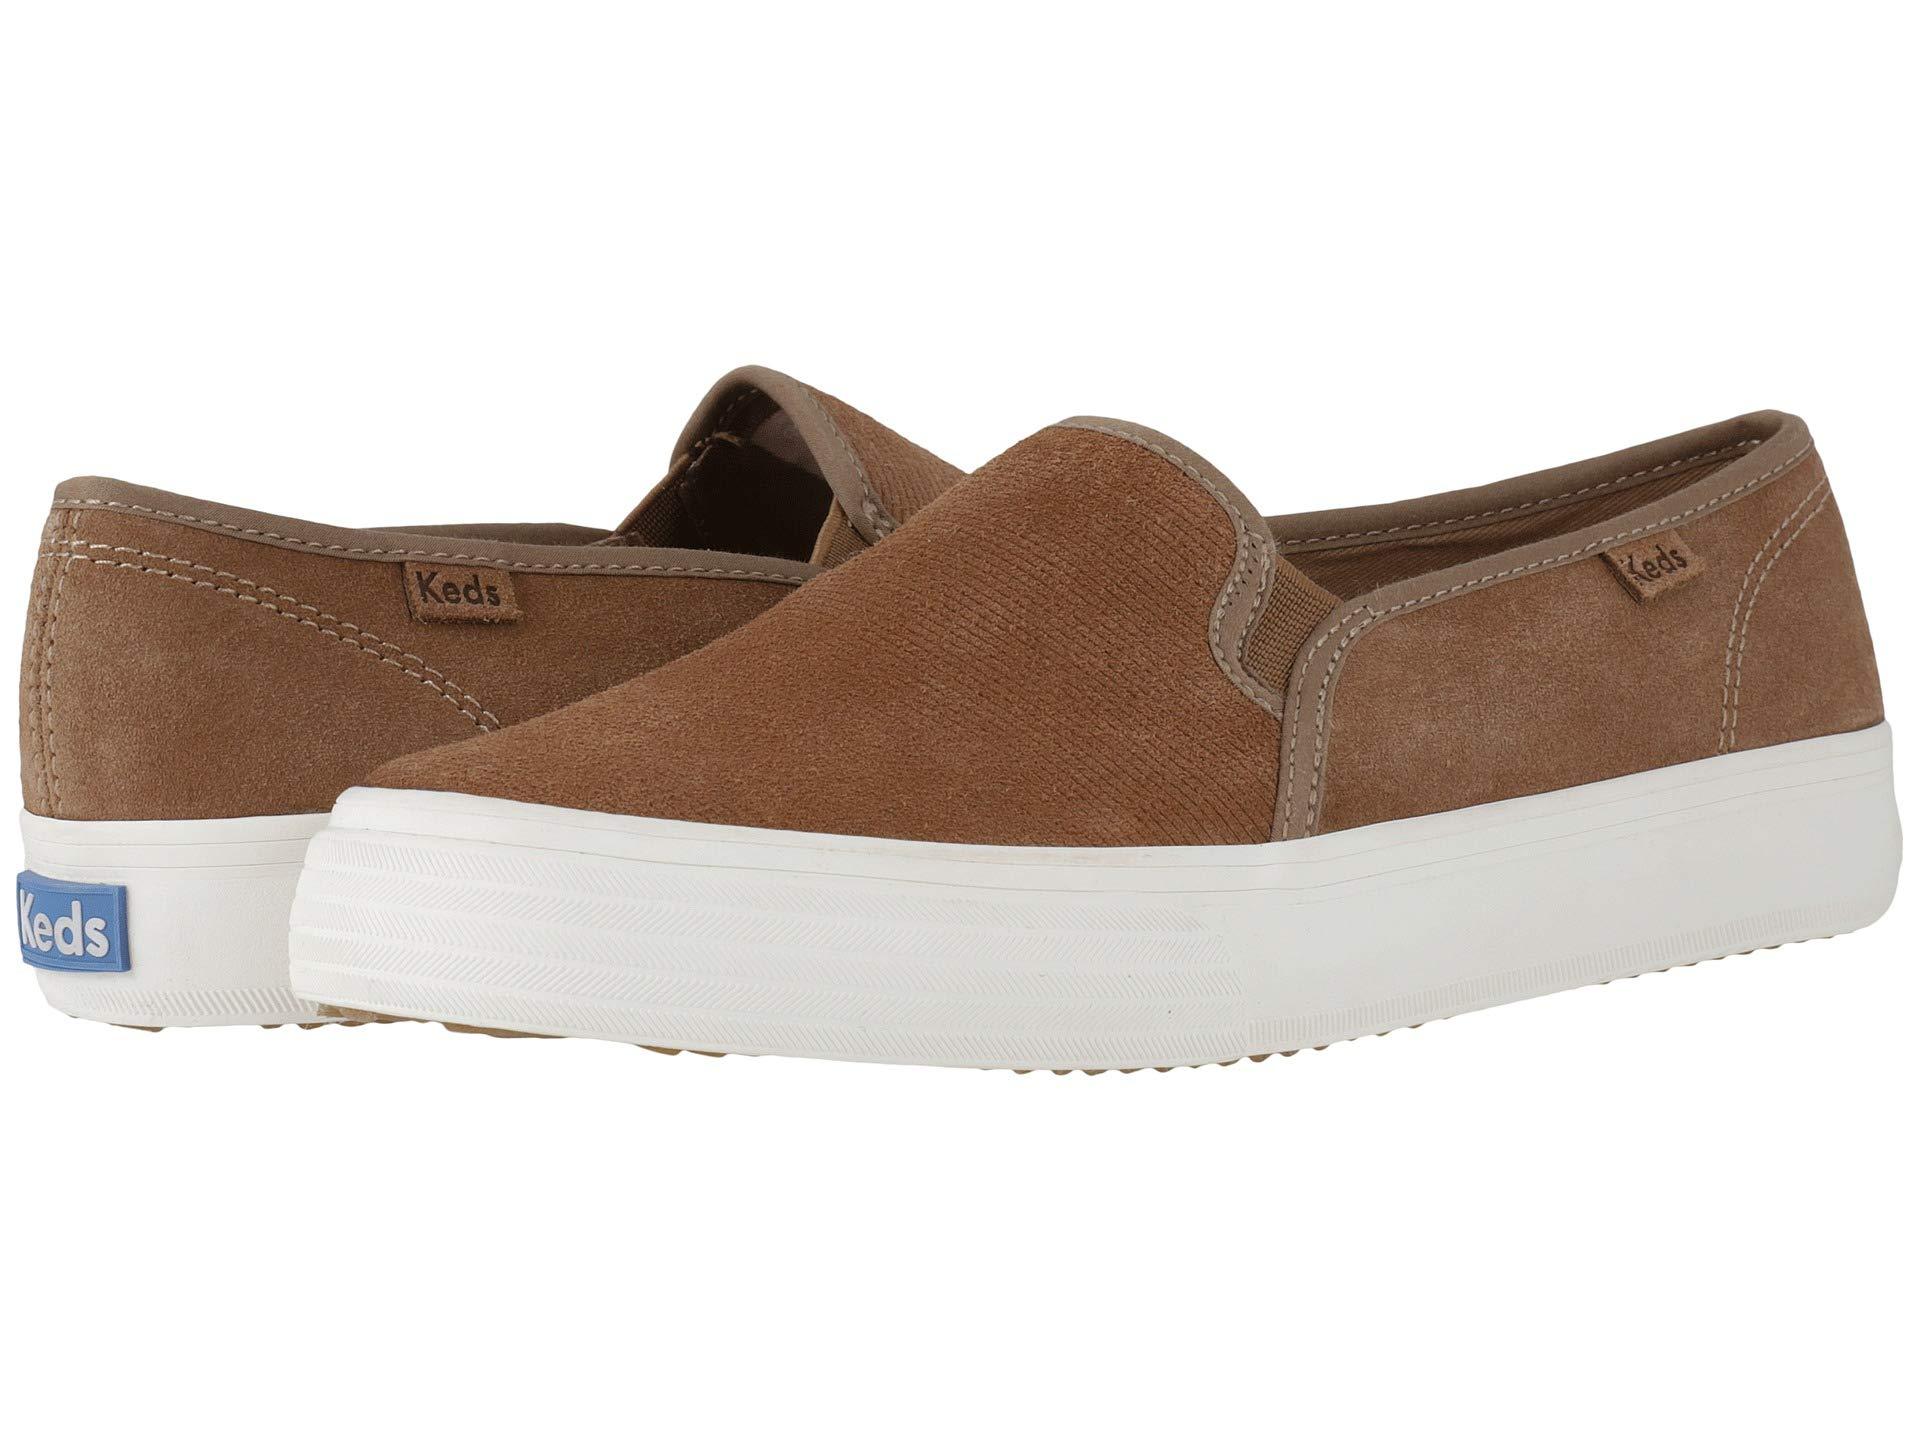 Keds Double Decker Suede in Brown - Lyst